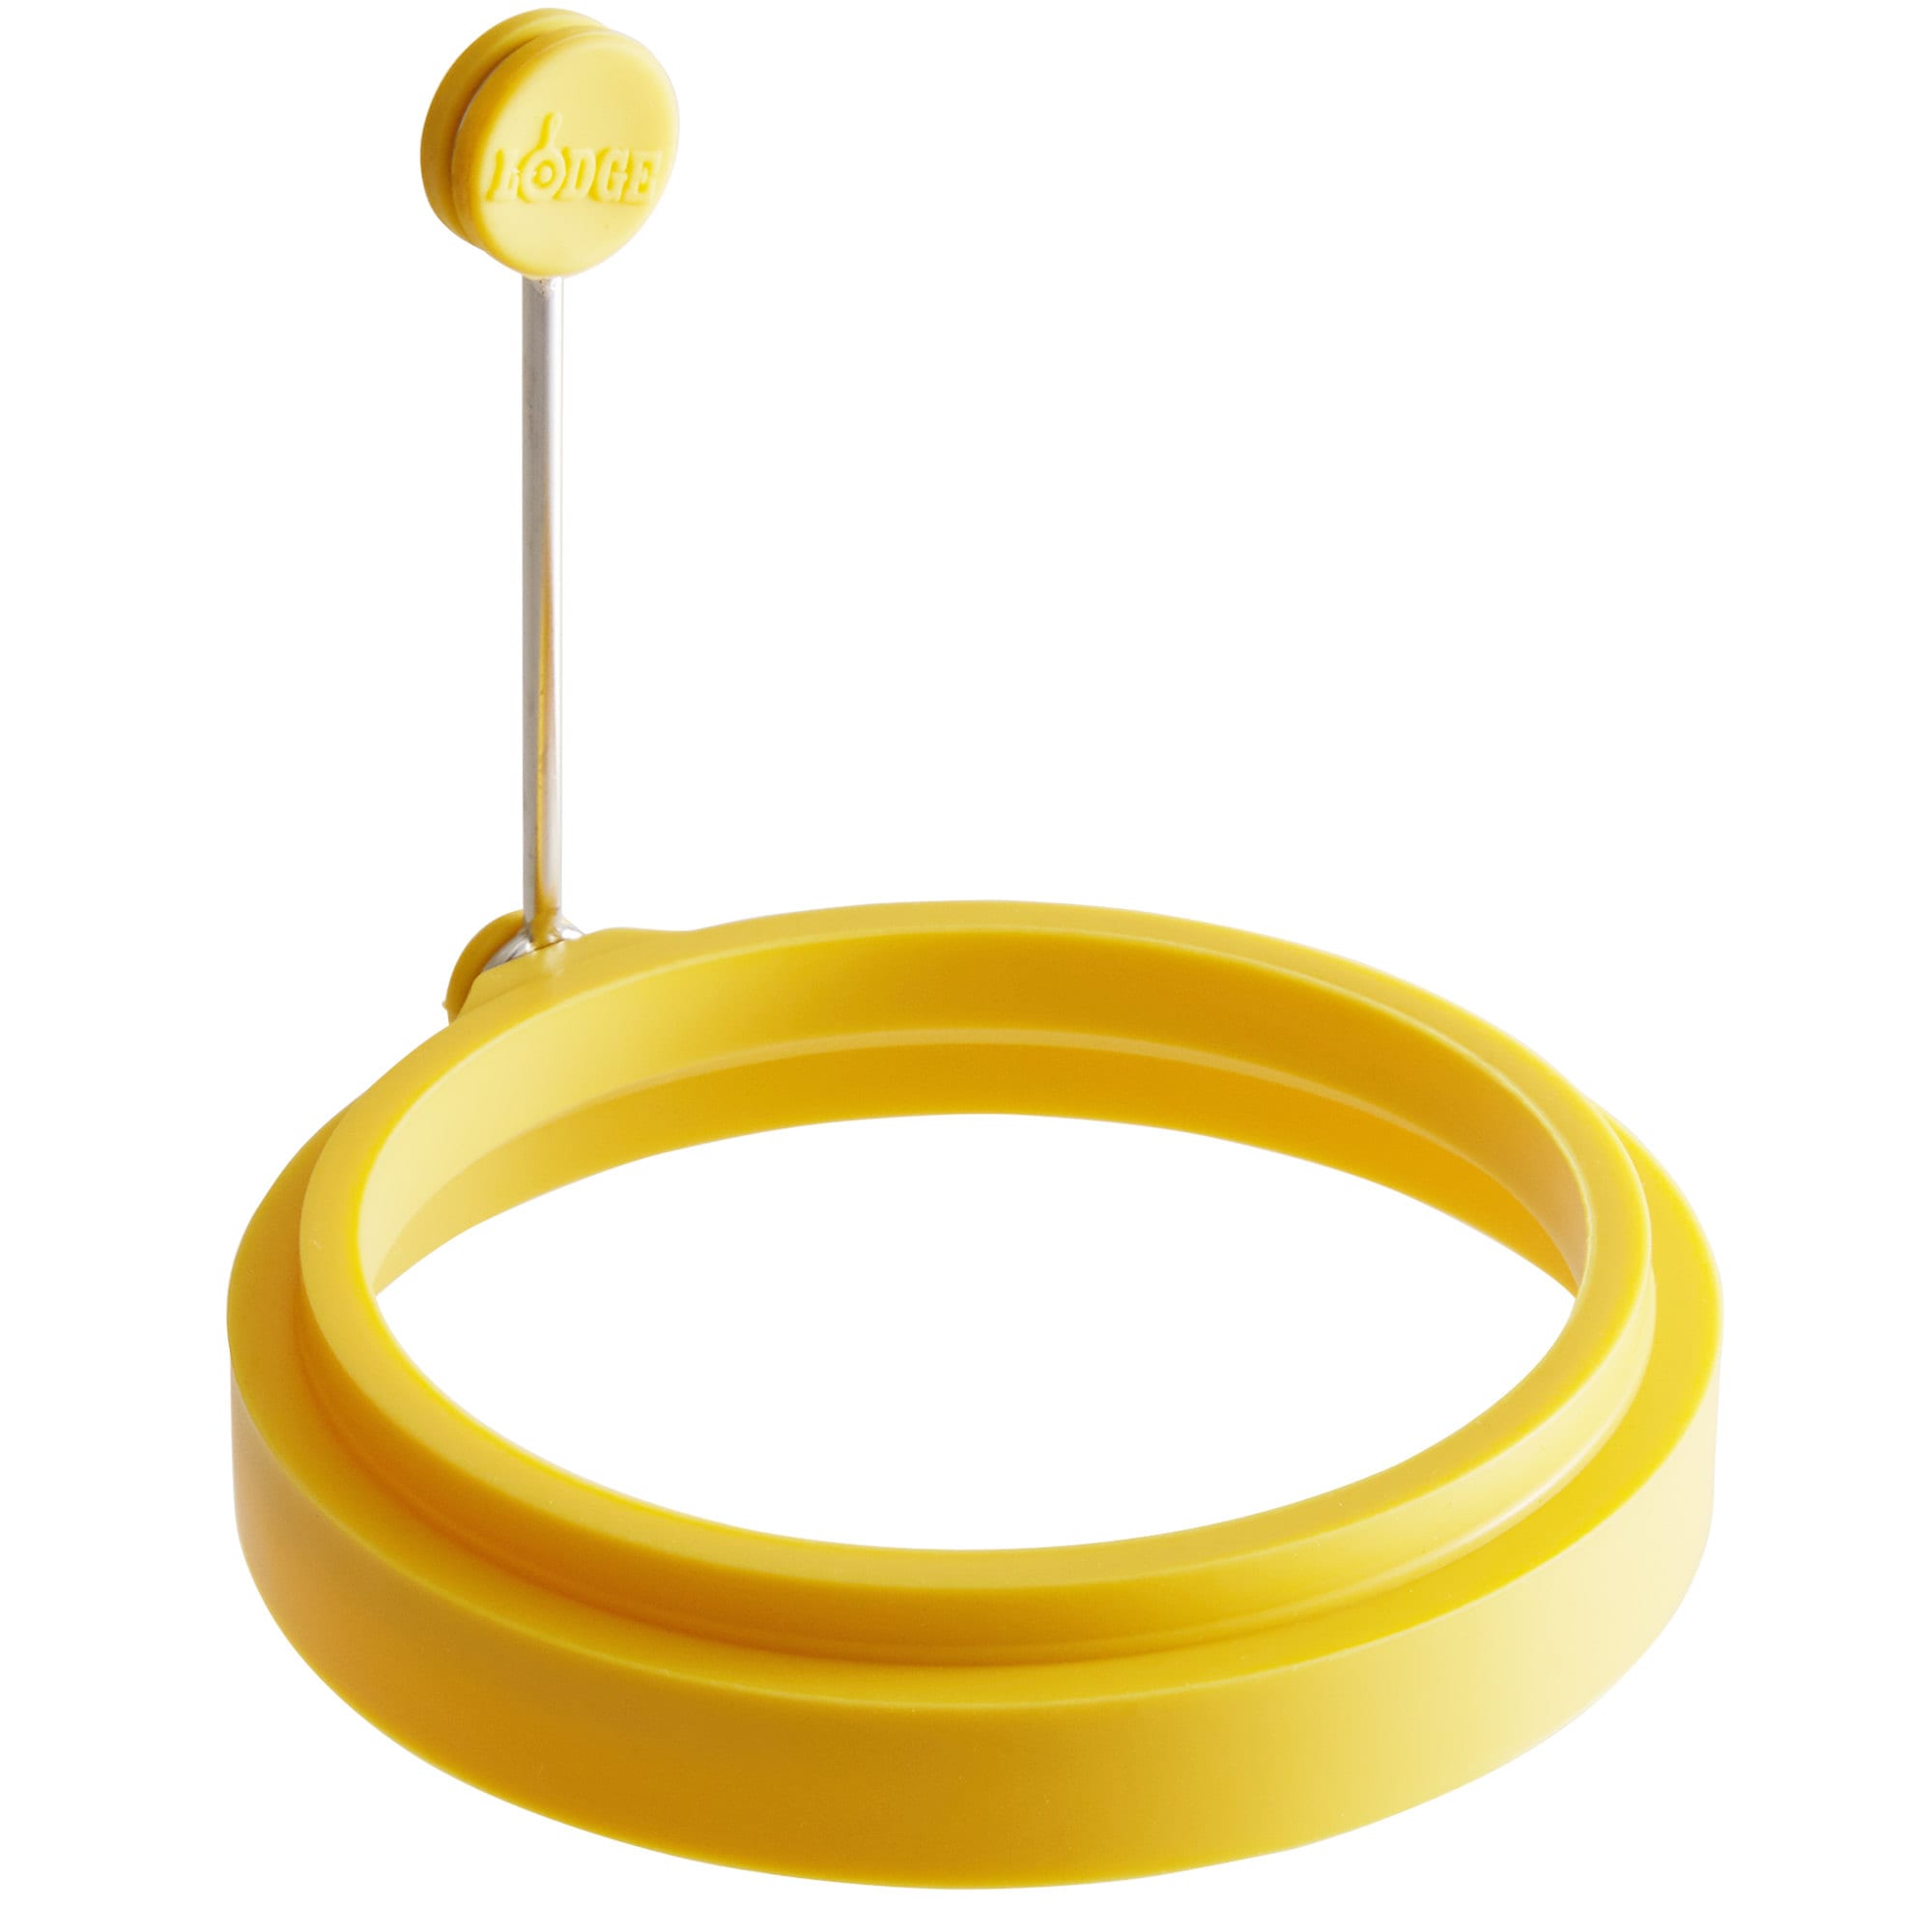 Lodge ASER 4 Yellow Non-Stick Silicone Egg Ring with Stay Cool Handle